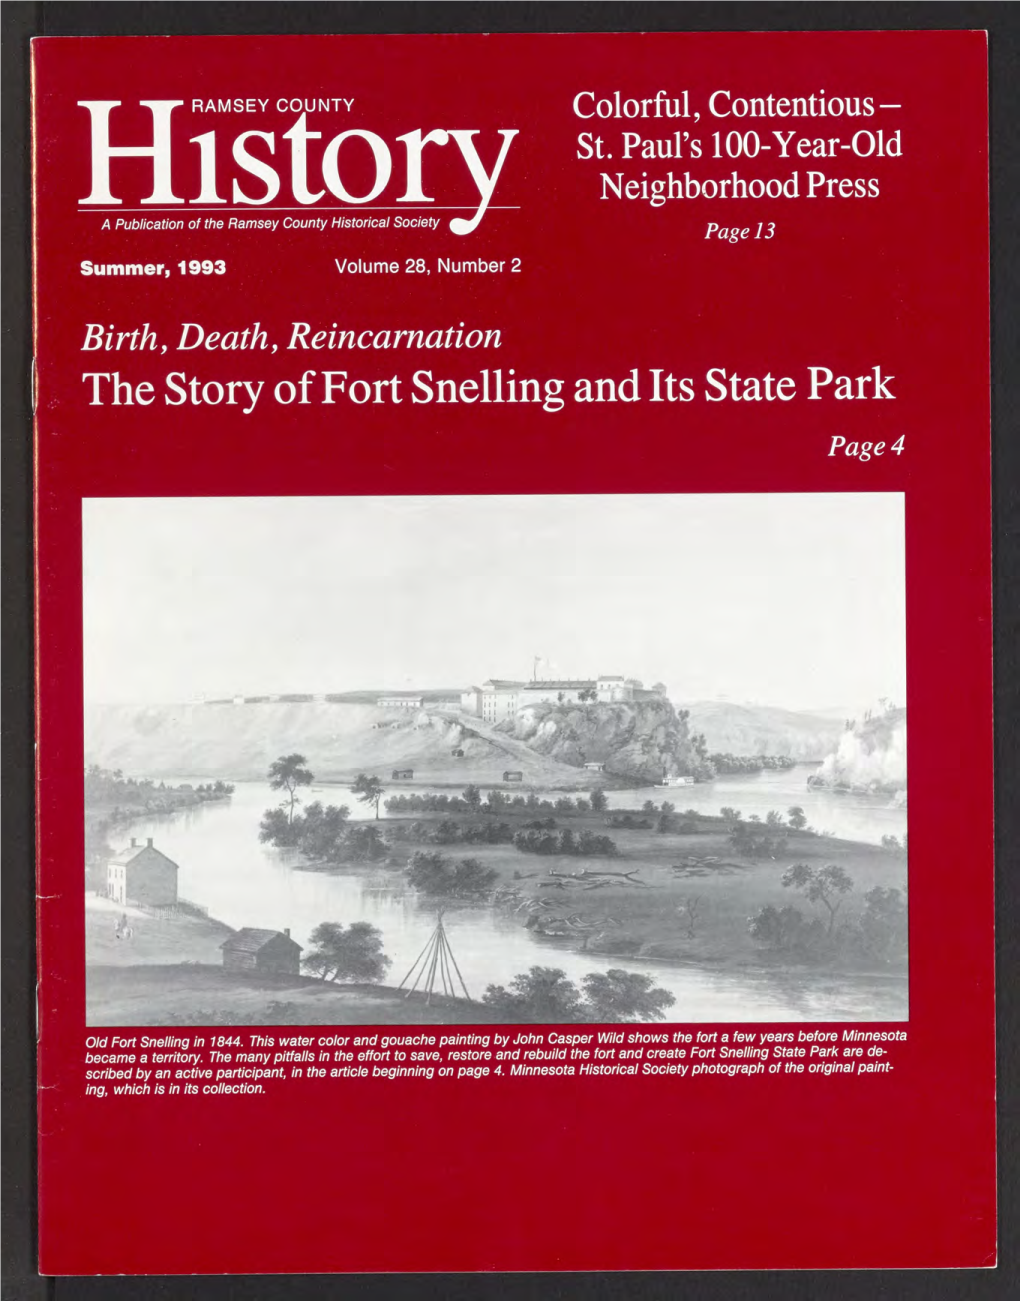 The Story of Fort Snelling and Its State Park Page 4